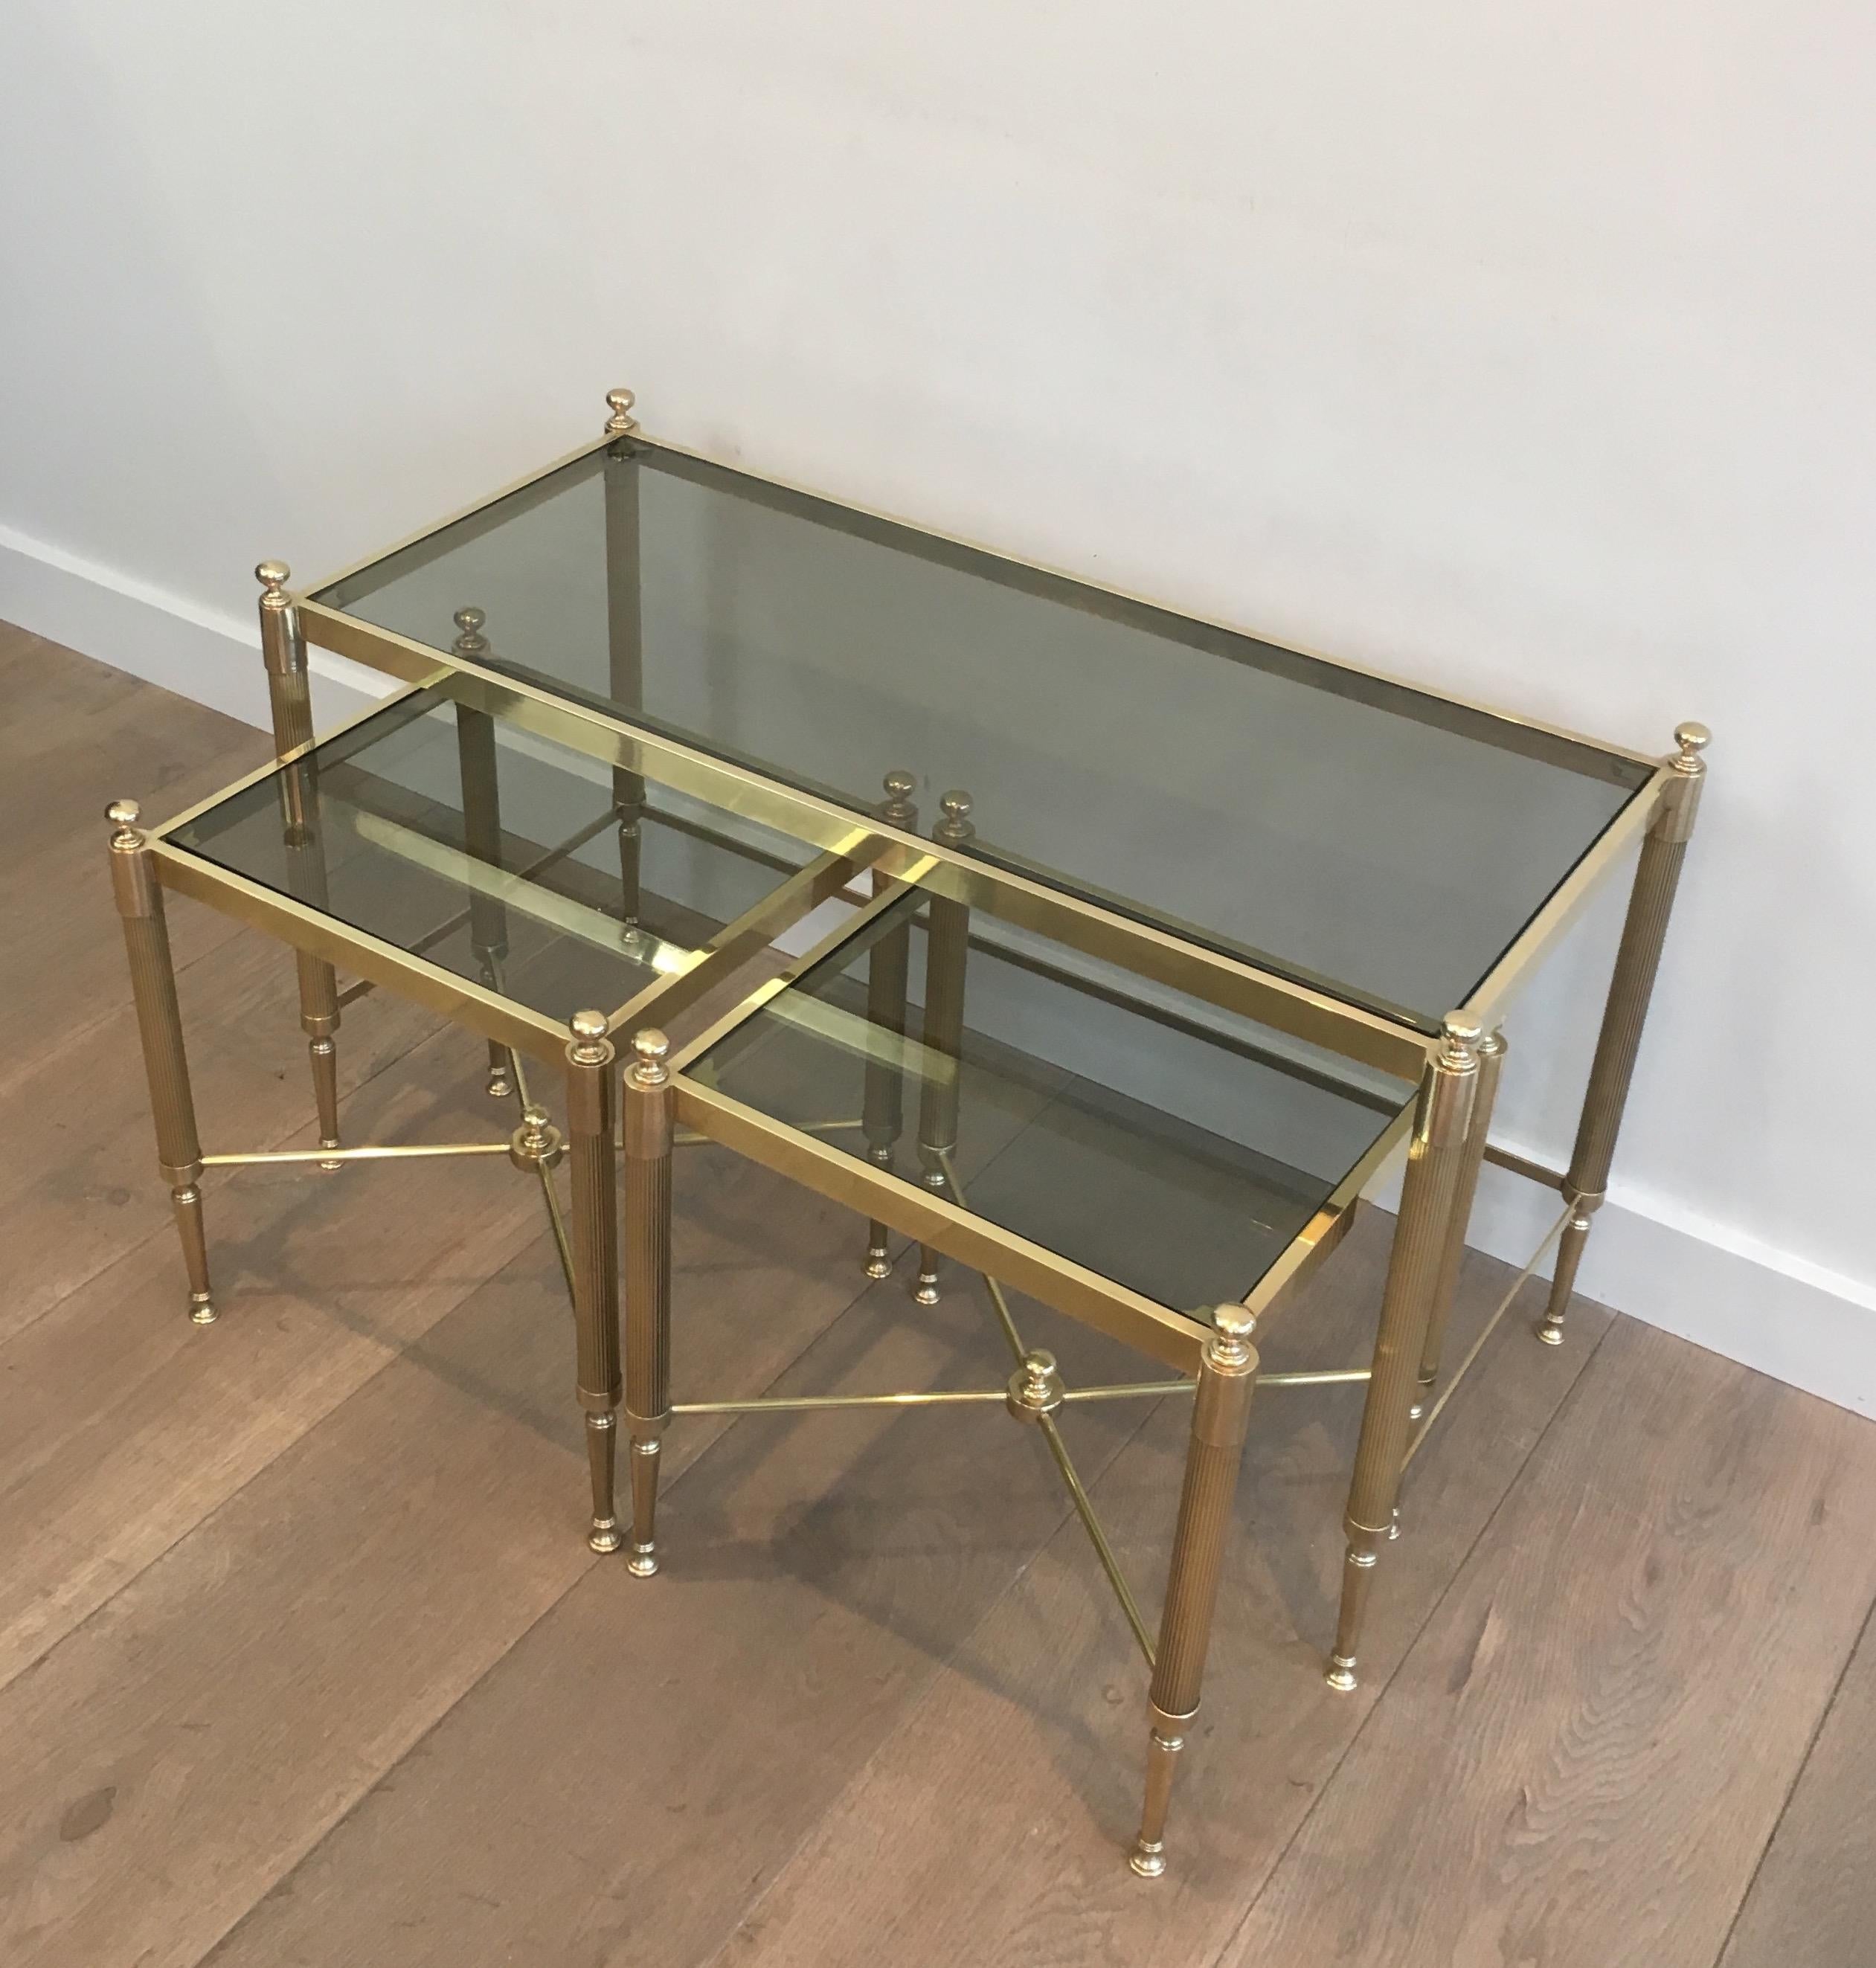 French Tripartite Brass Coffee Table made of a Main Table and 2 Nesting Side Tables